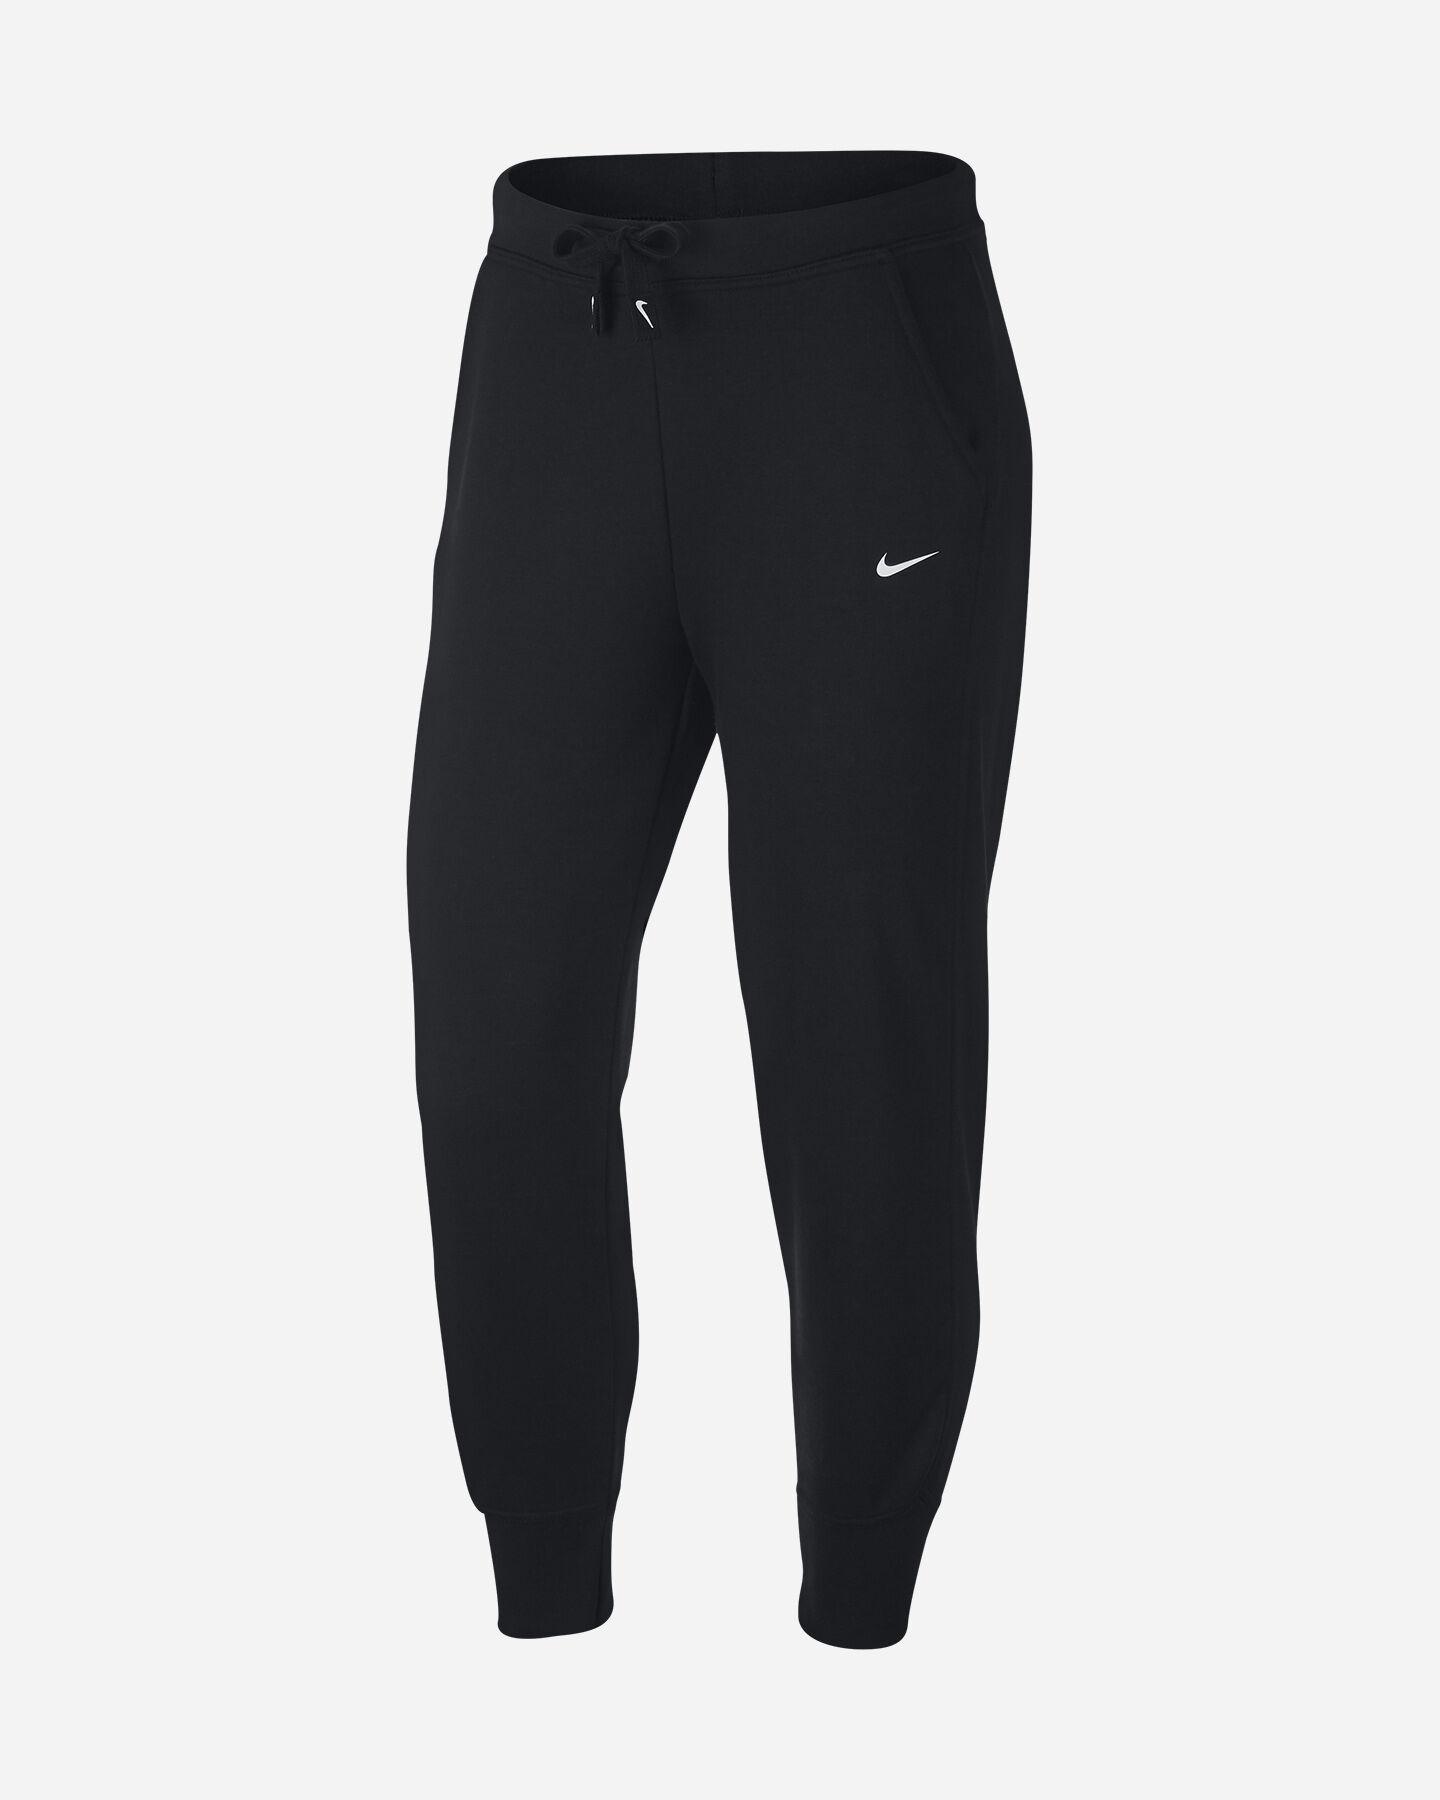  Pantalone training NIKE DRY GET FIT W S5268717|010|XS scatto 0